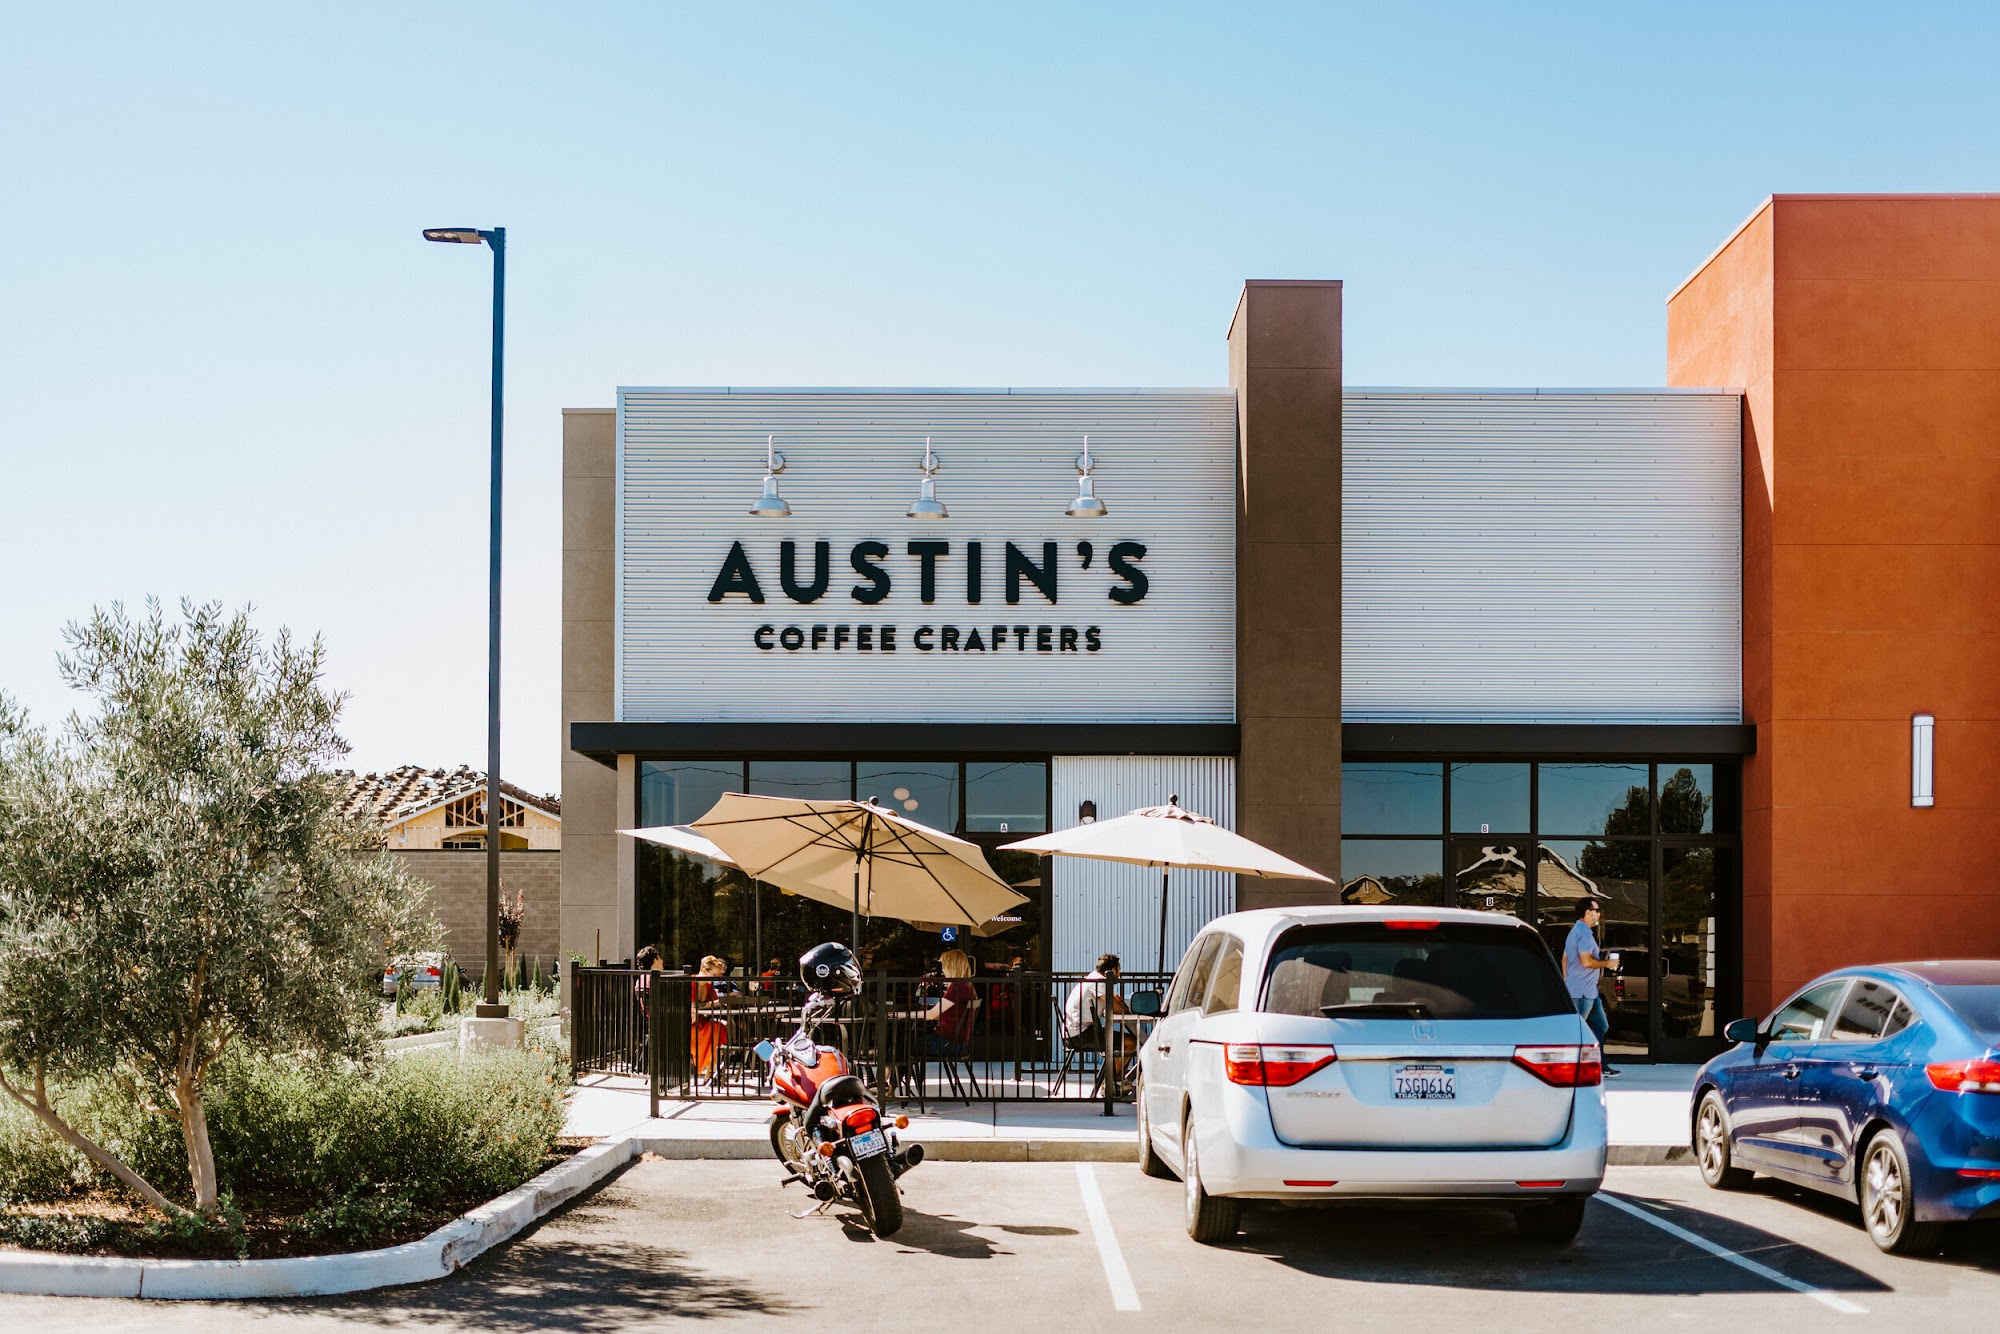 Austin's Coffee Crafters